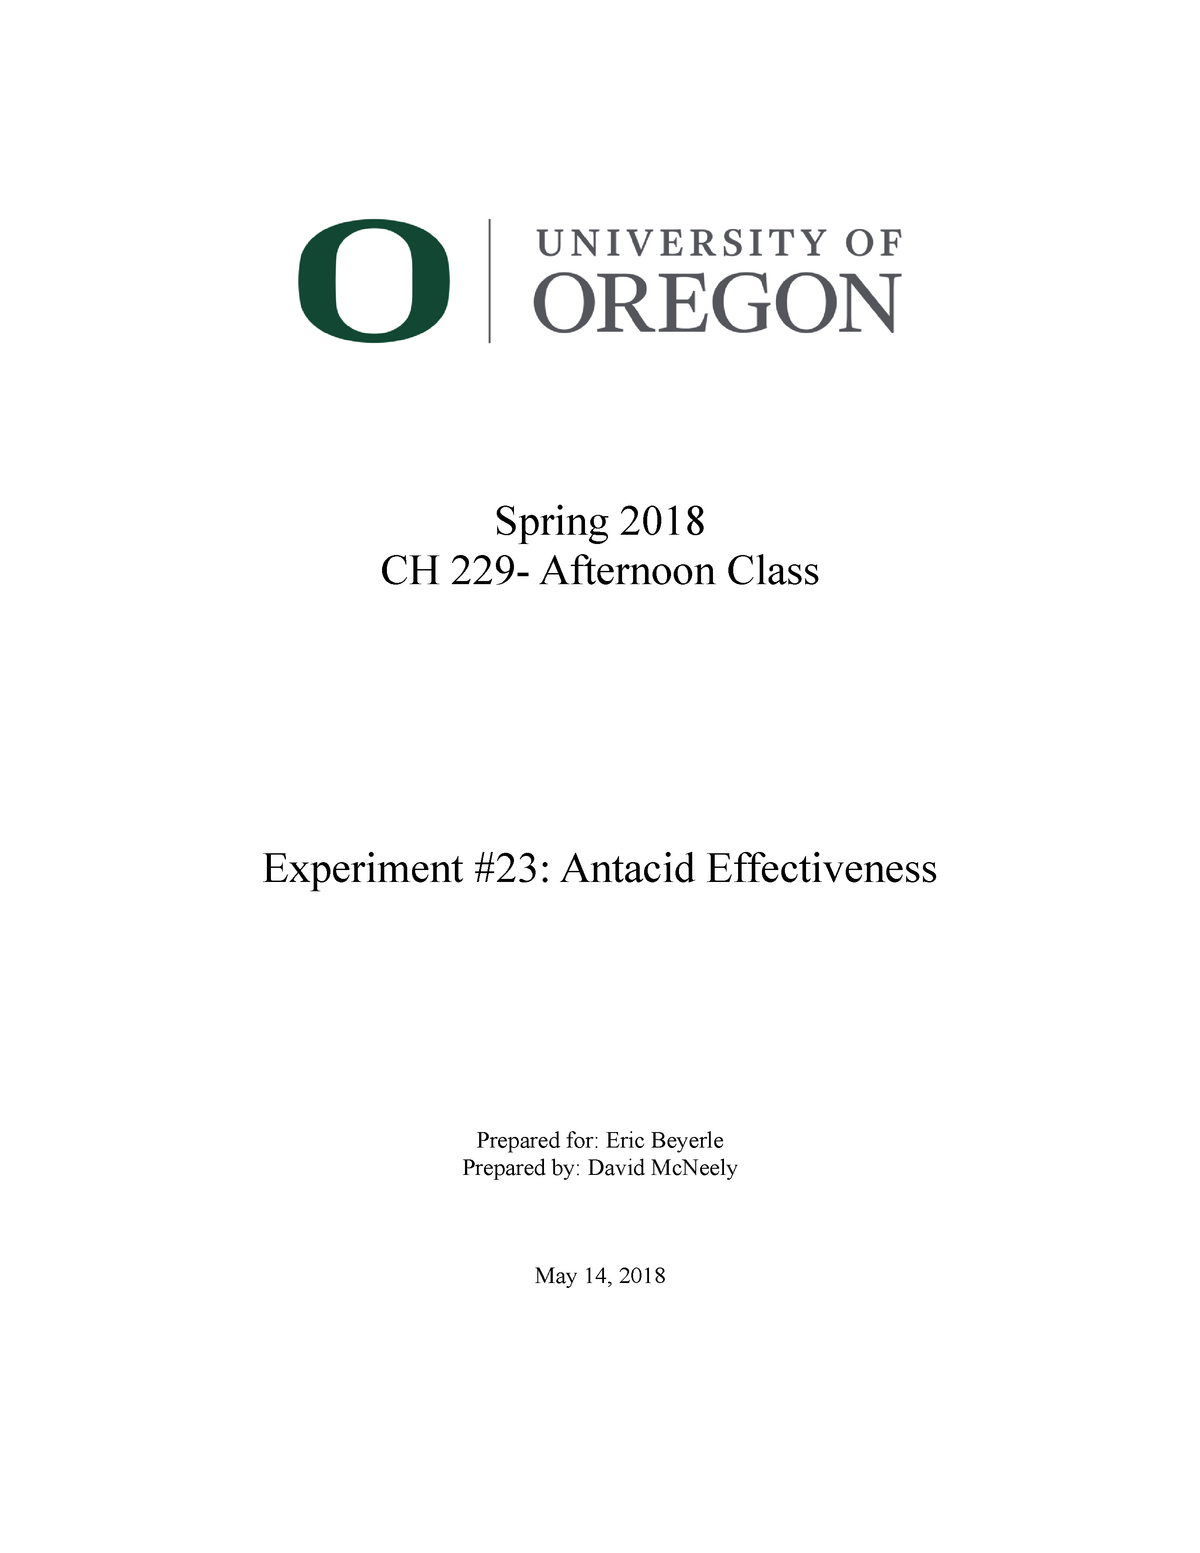 lab-report-exp-24-spring-2018-ch-229-afternoon-class-experiment